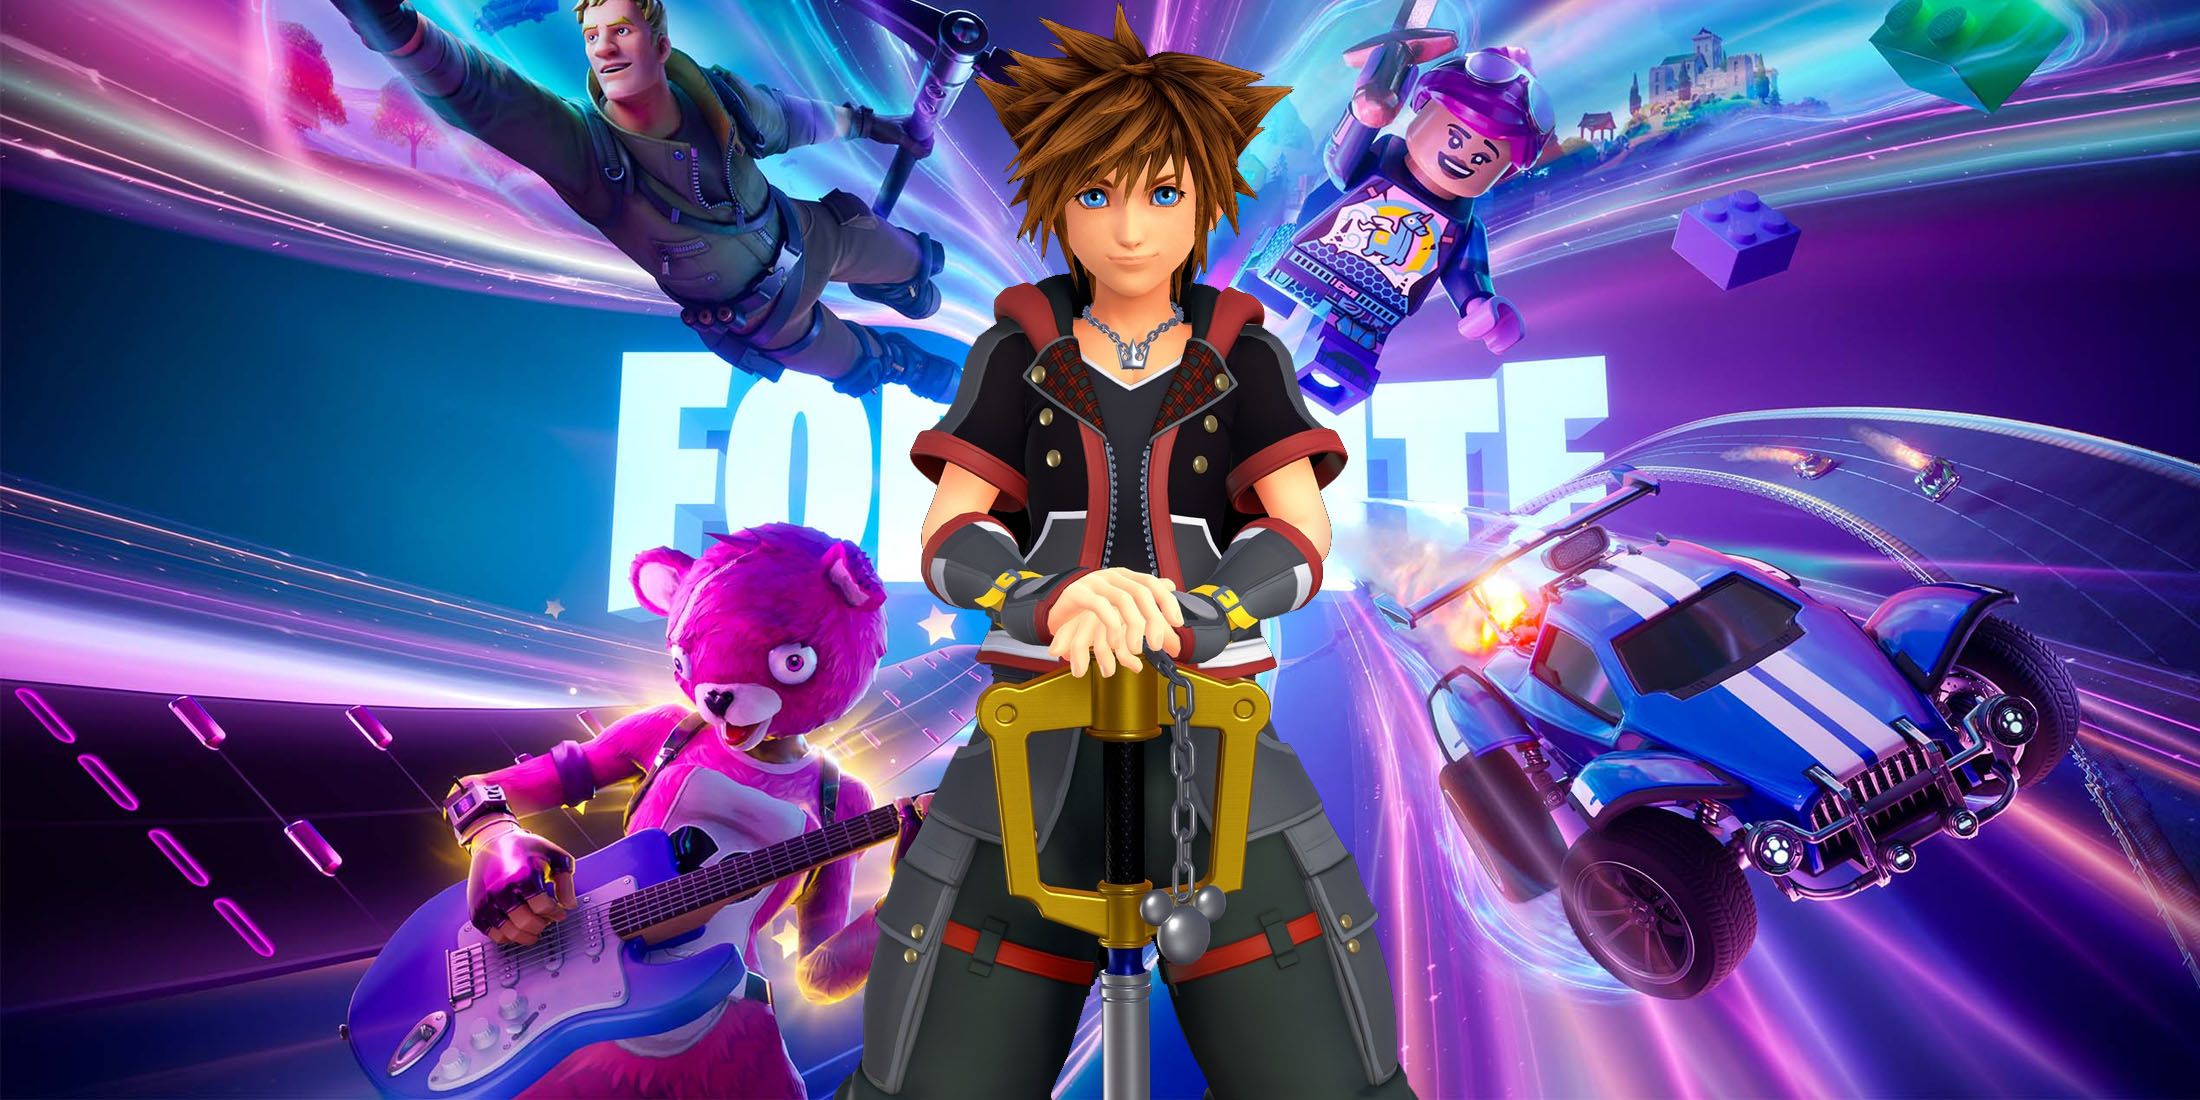 An image of Sora from Kingdom Hearts 3 placed in a Fortnite promotional image.